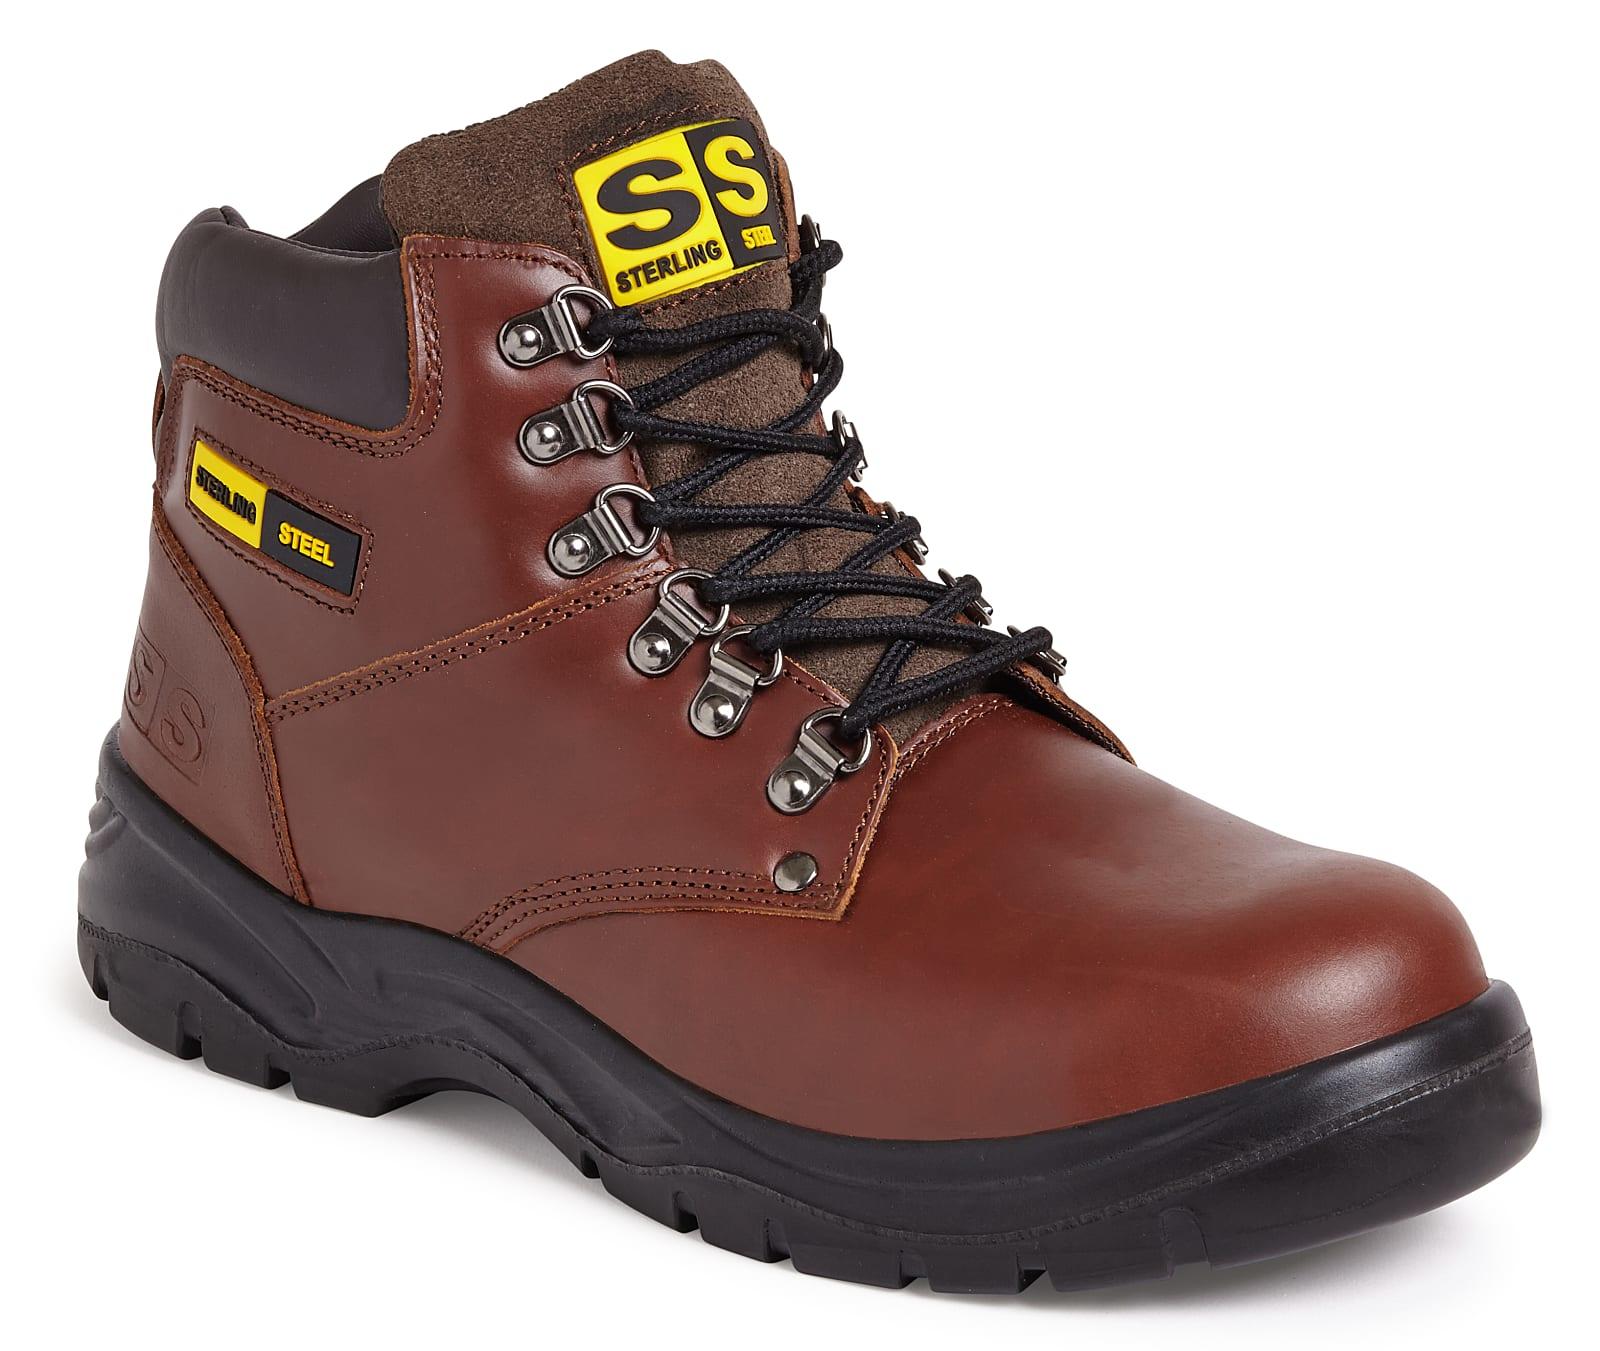 Sterling Steel SS807SM Safety Hiker Boots in Brown (Product Code: SS807SM)